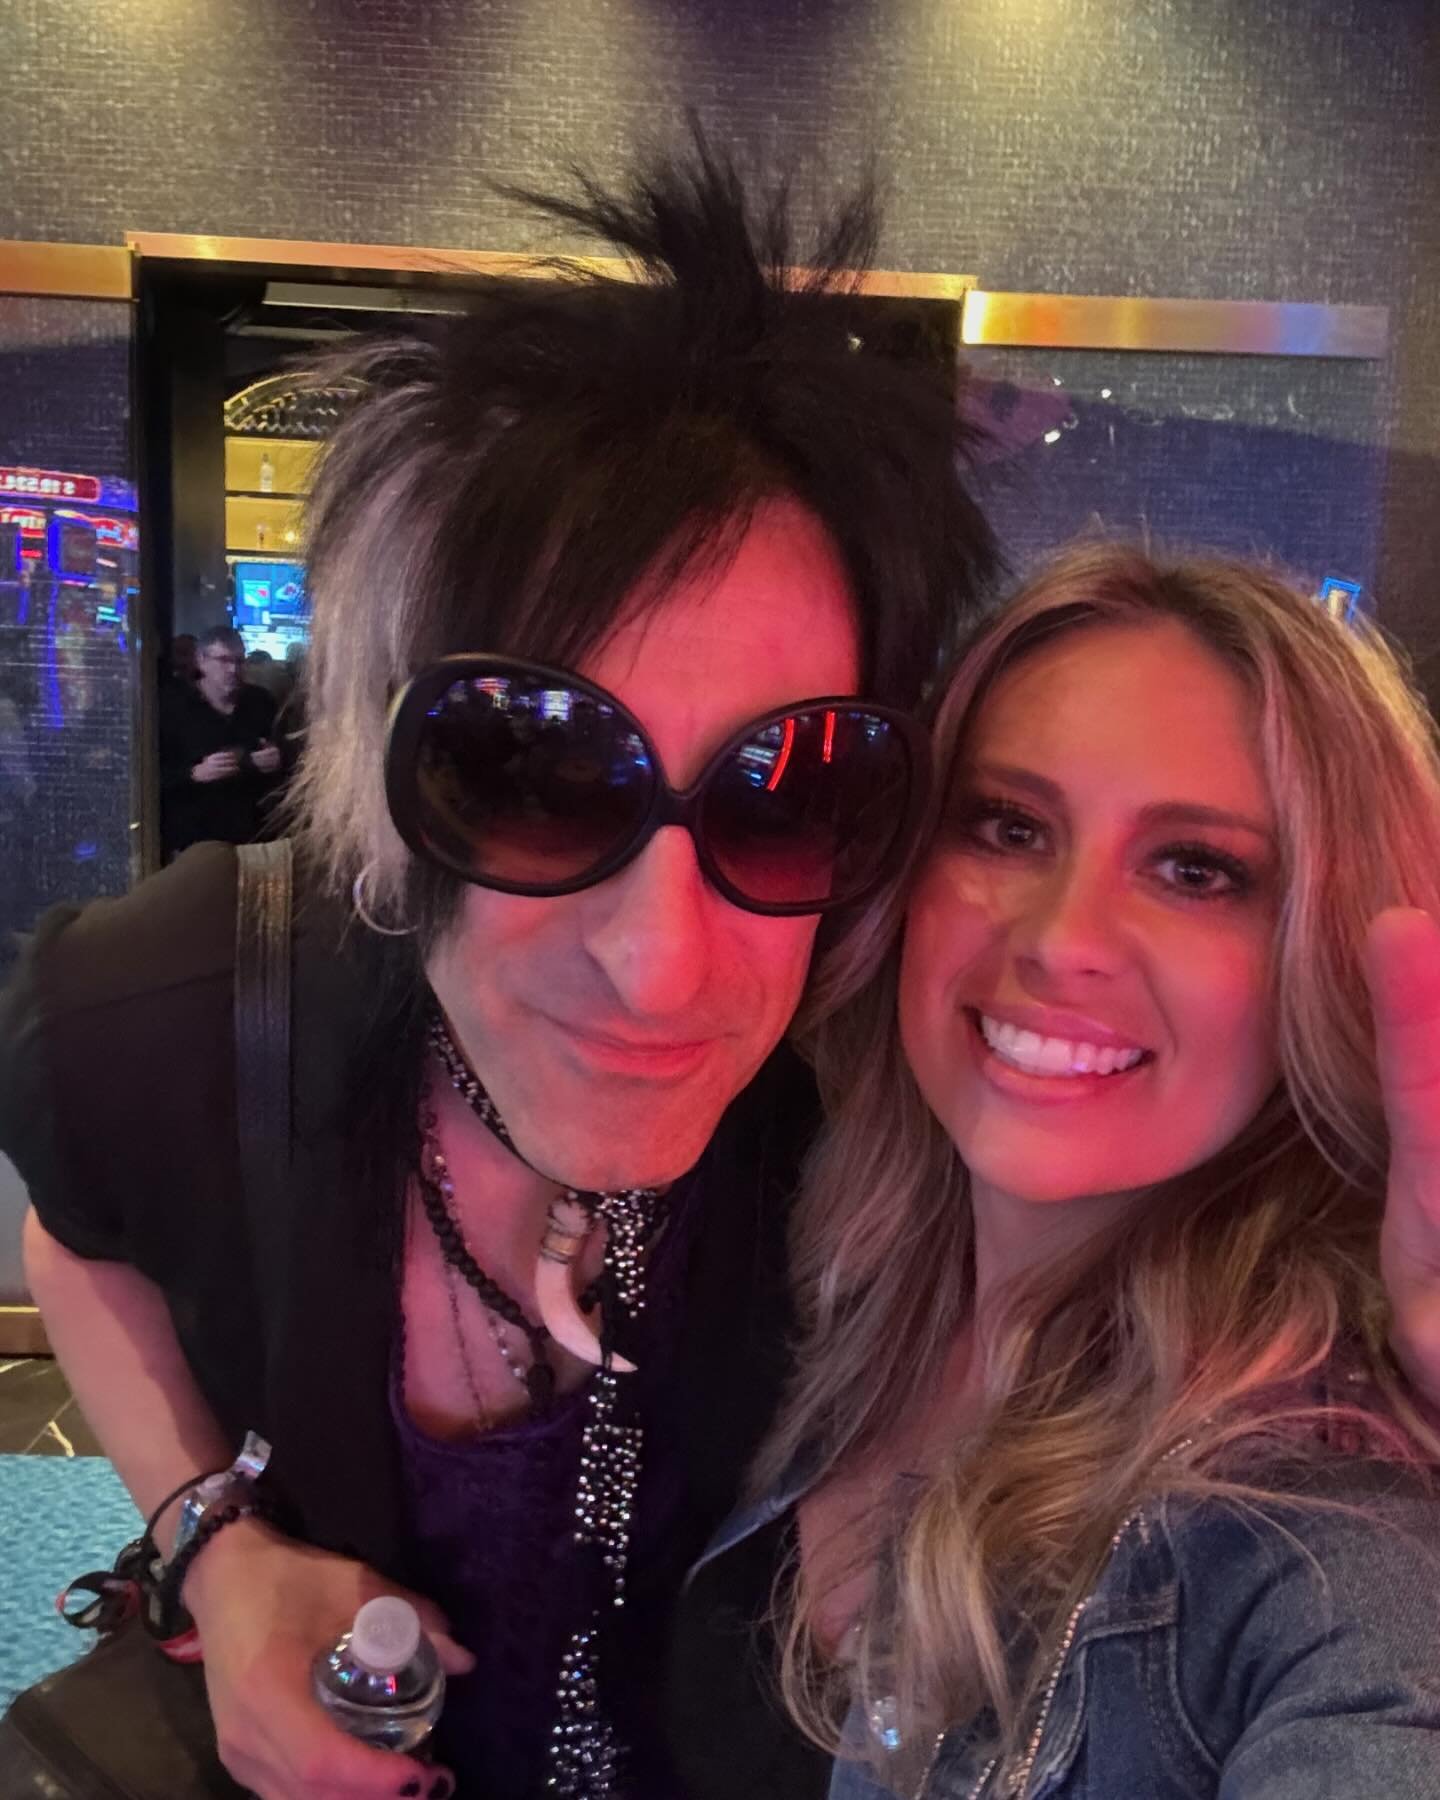 So nice hanging with @jackybambam933 and getting to talk about the Muscle Shoals music scene 💫

Listening to Jacky Bam Bam on @933wmmr Philadelphia was truly a pivotal moment in my life, it led to my eventual career choice. My Dad used to always hav